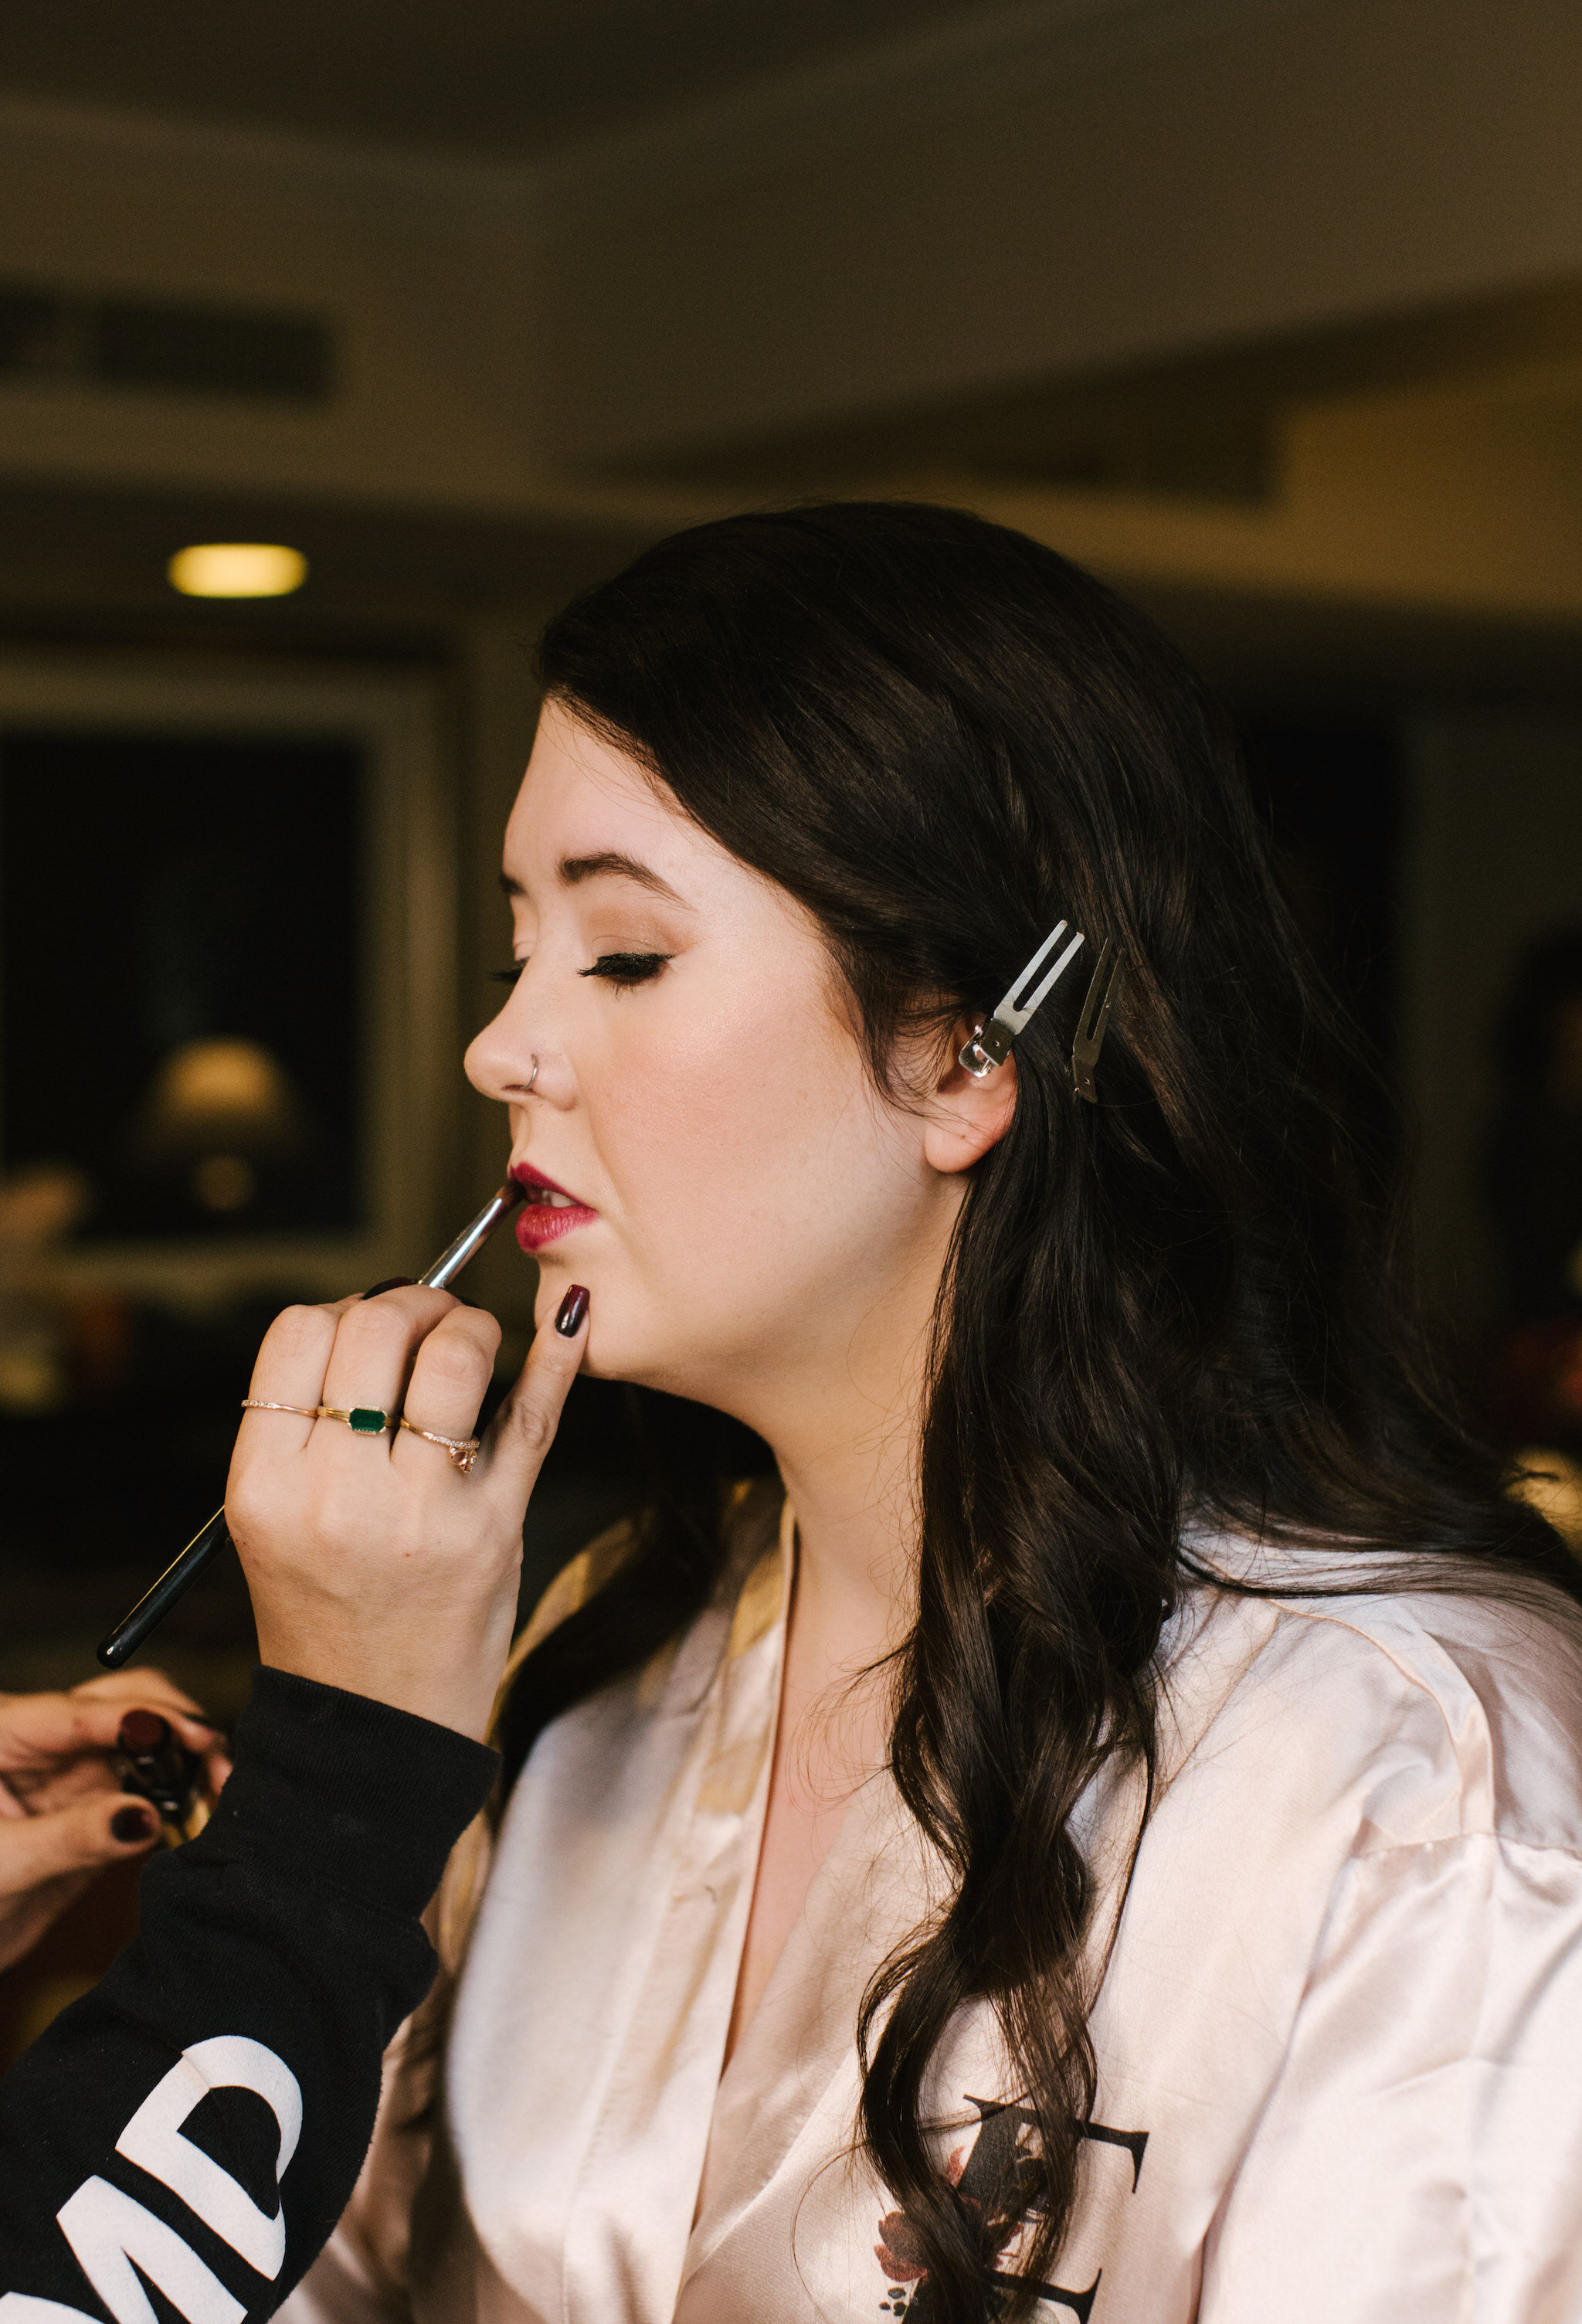 Bridal Makeup: Elegant Jewel-Toned Wedding captured by Dorey Kronick featured on CHI thee WED